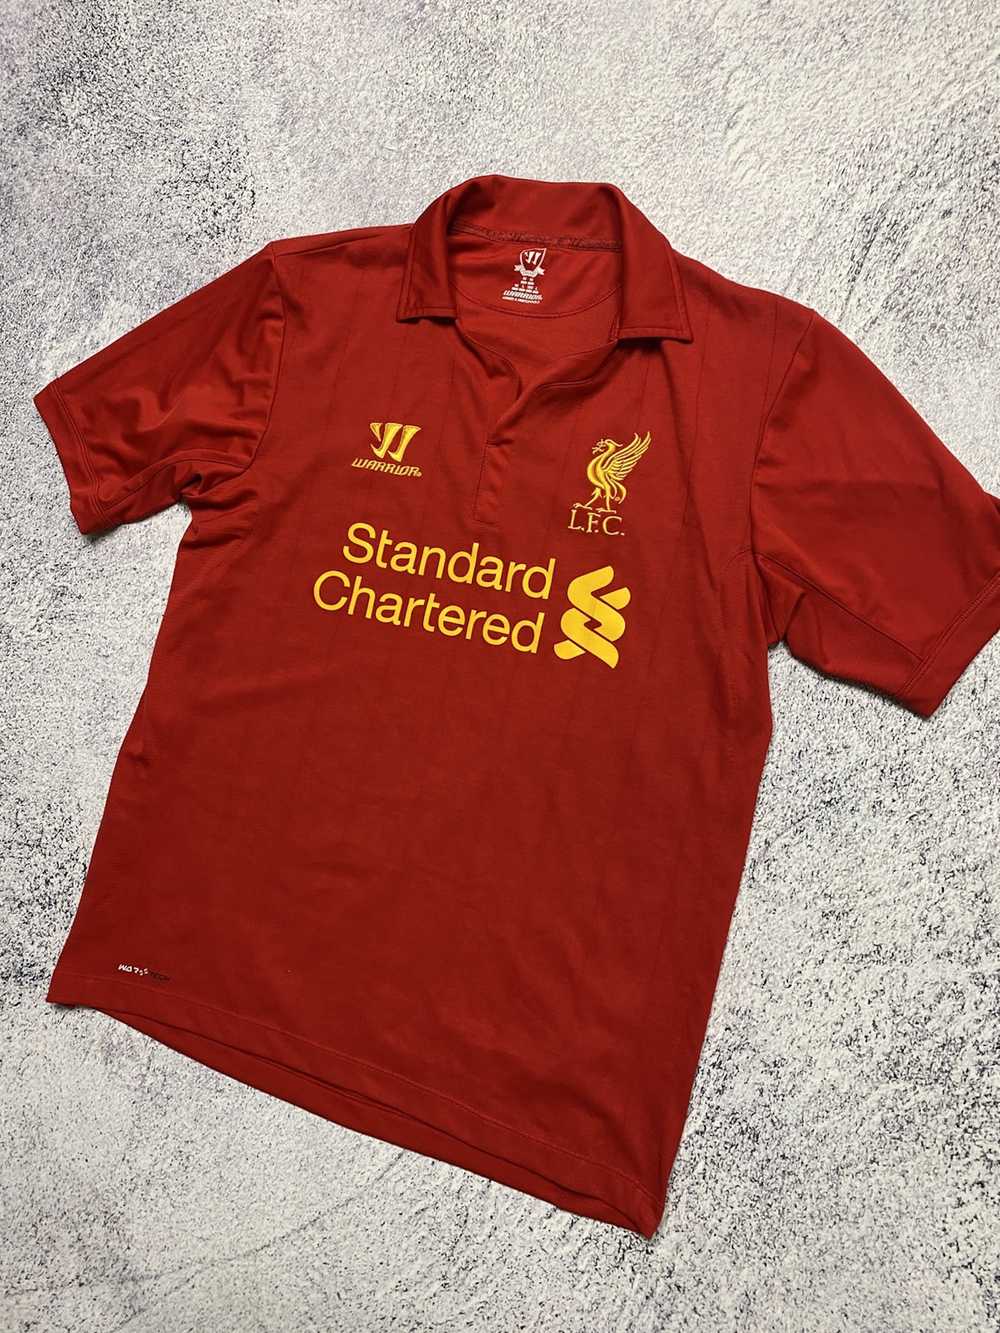 Jersey × Liverpool × Soccer Jersey Liverpool 2012… - image 2